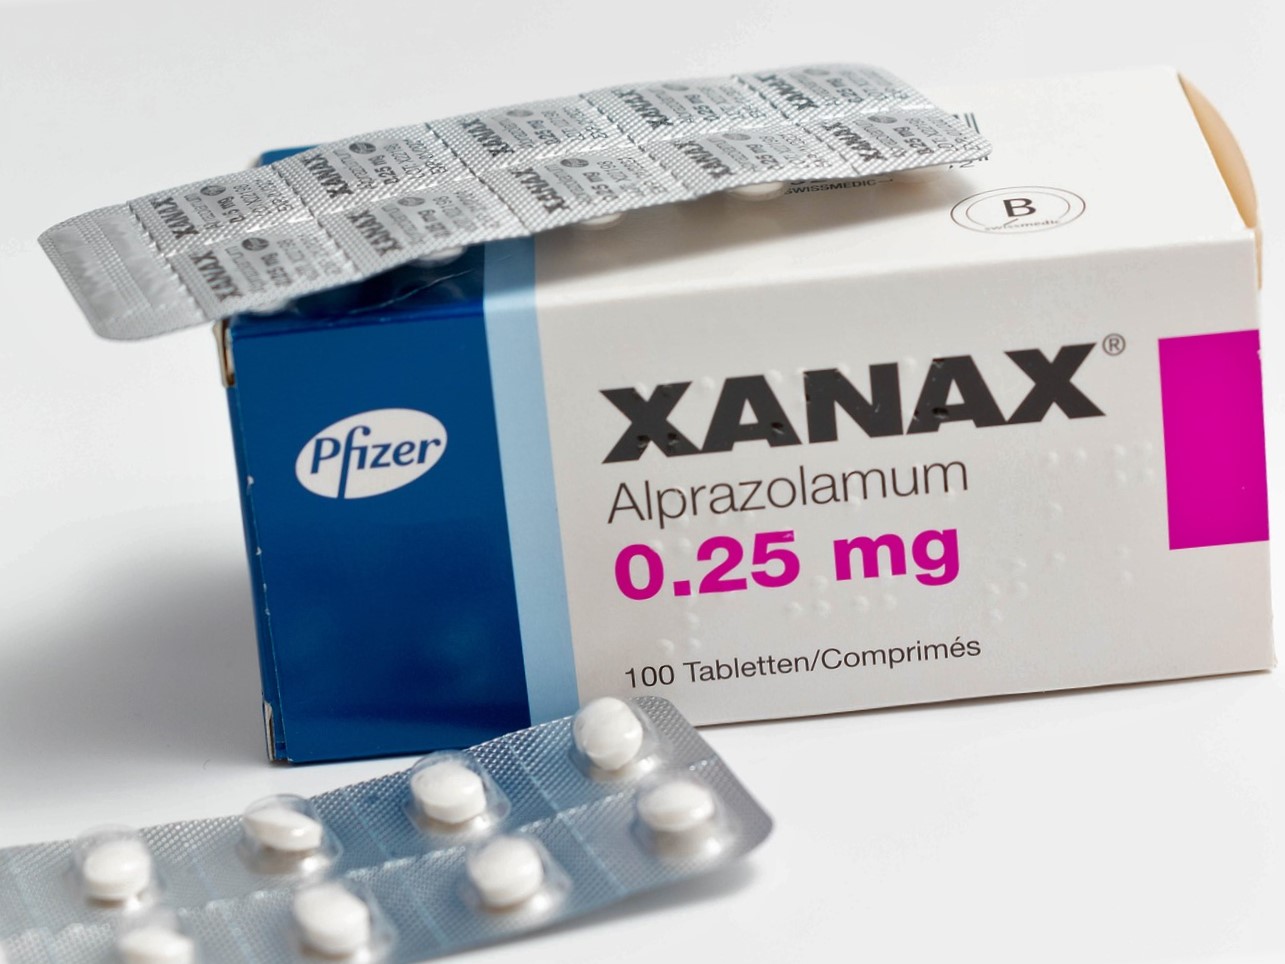 Do Pre Employment Drug Tests Test for Benzodiazepines?